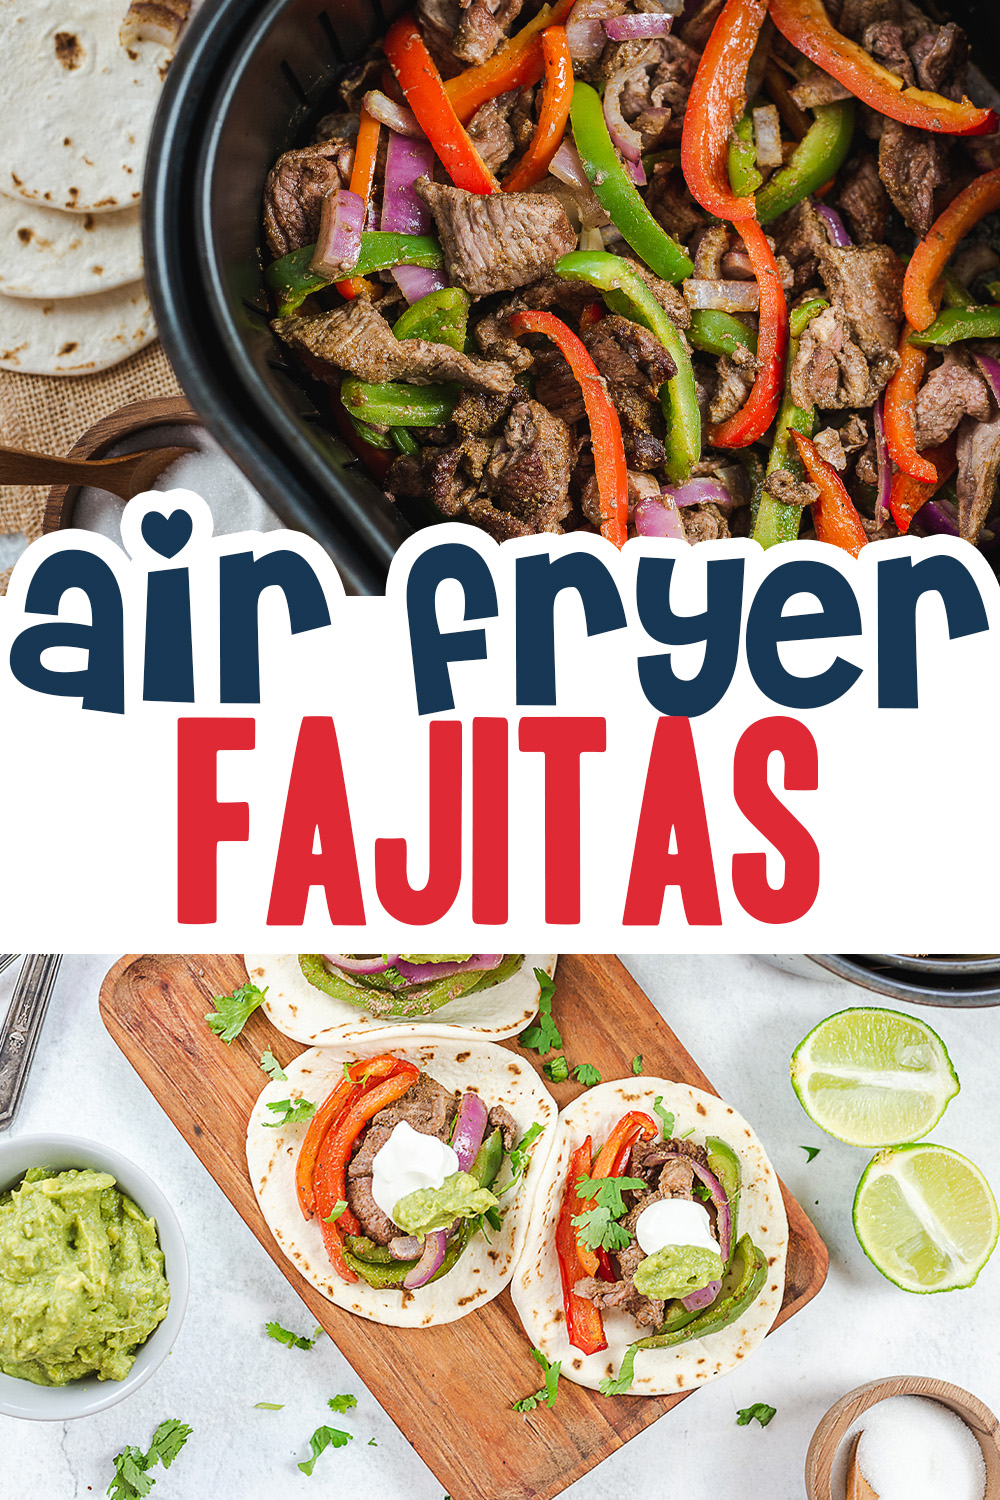 Our steak fajita recipe only takes 12 minutes to cook in the air fryer!